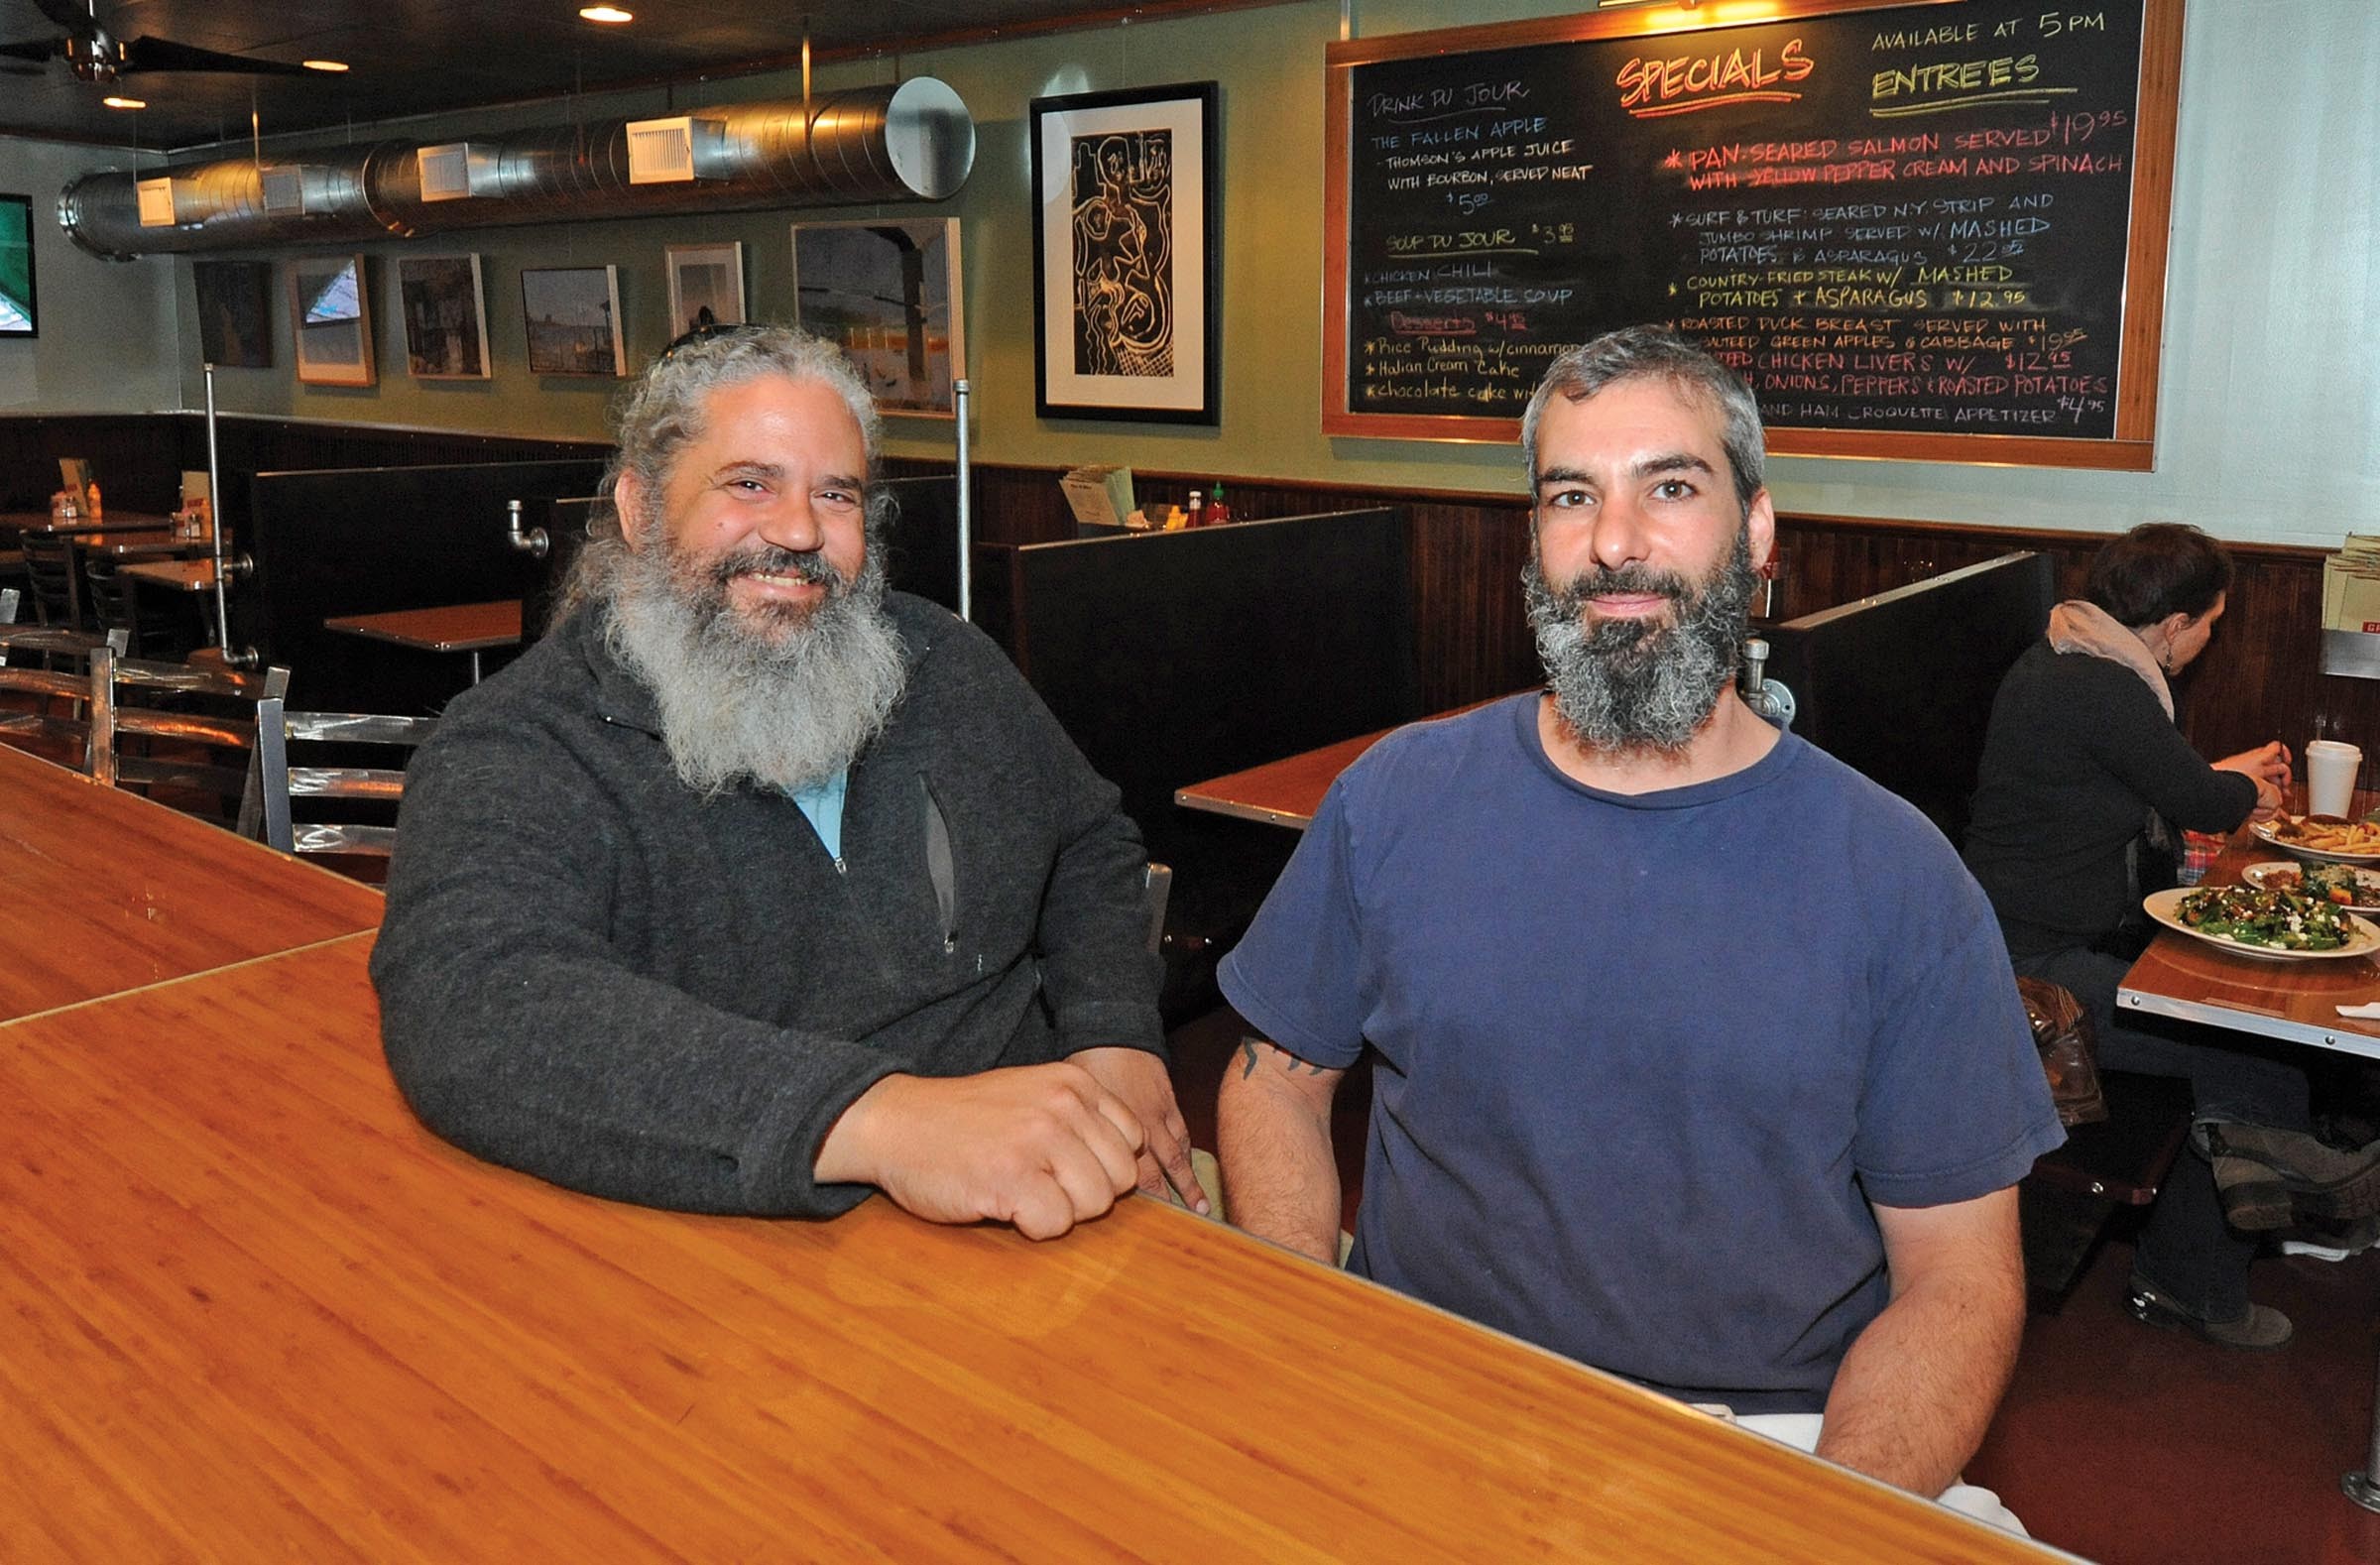 Manny Mendez and Chris DiLauro may not have appeared in “Lincoln,” but they're featured players at their new restaurant C&M Galley Kitchen in Stratford Hills. - SCOTT ELMQUIST